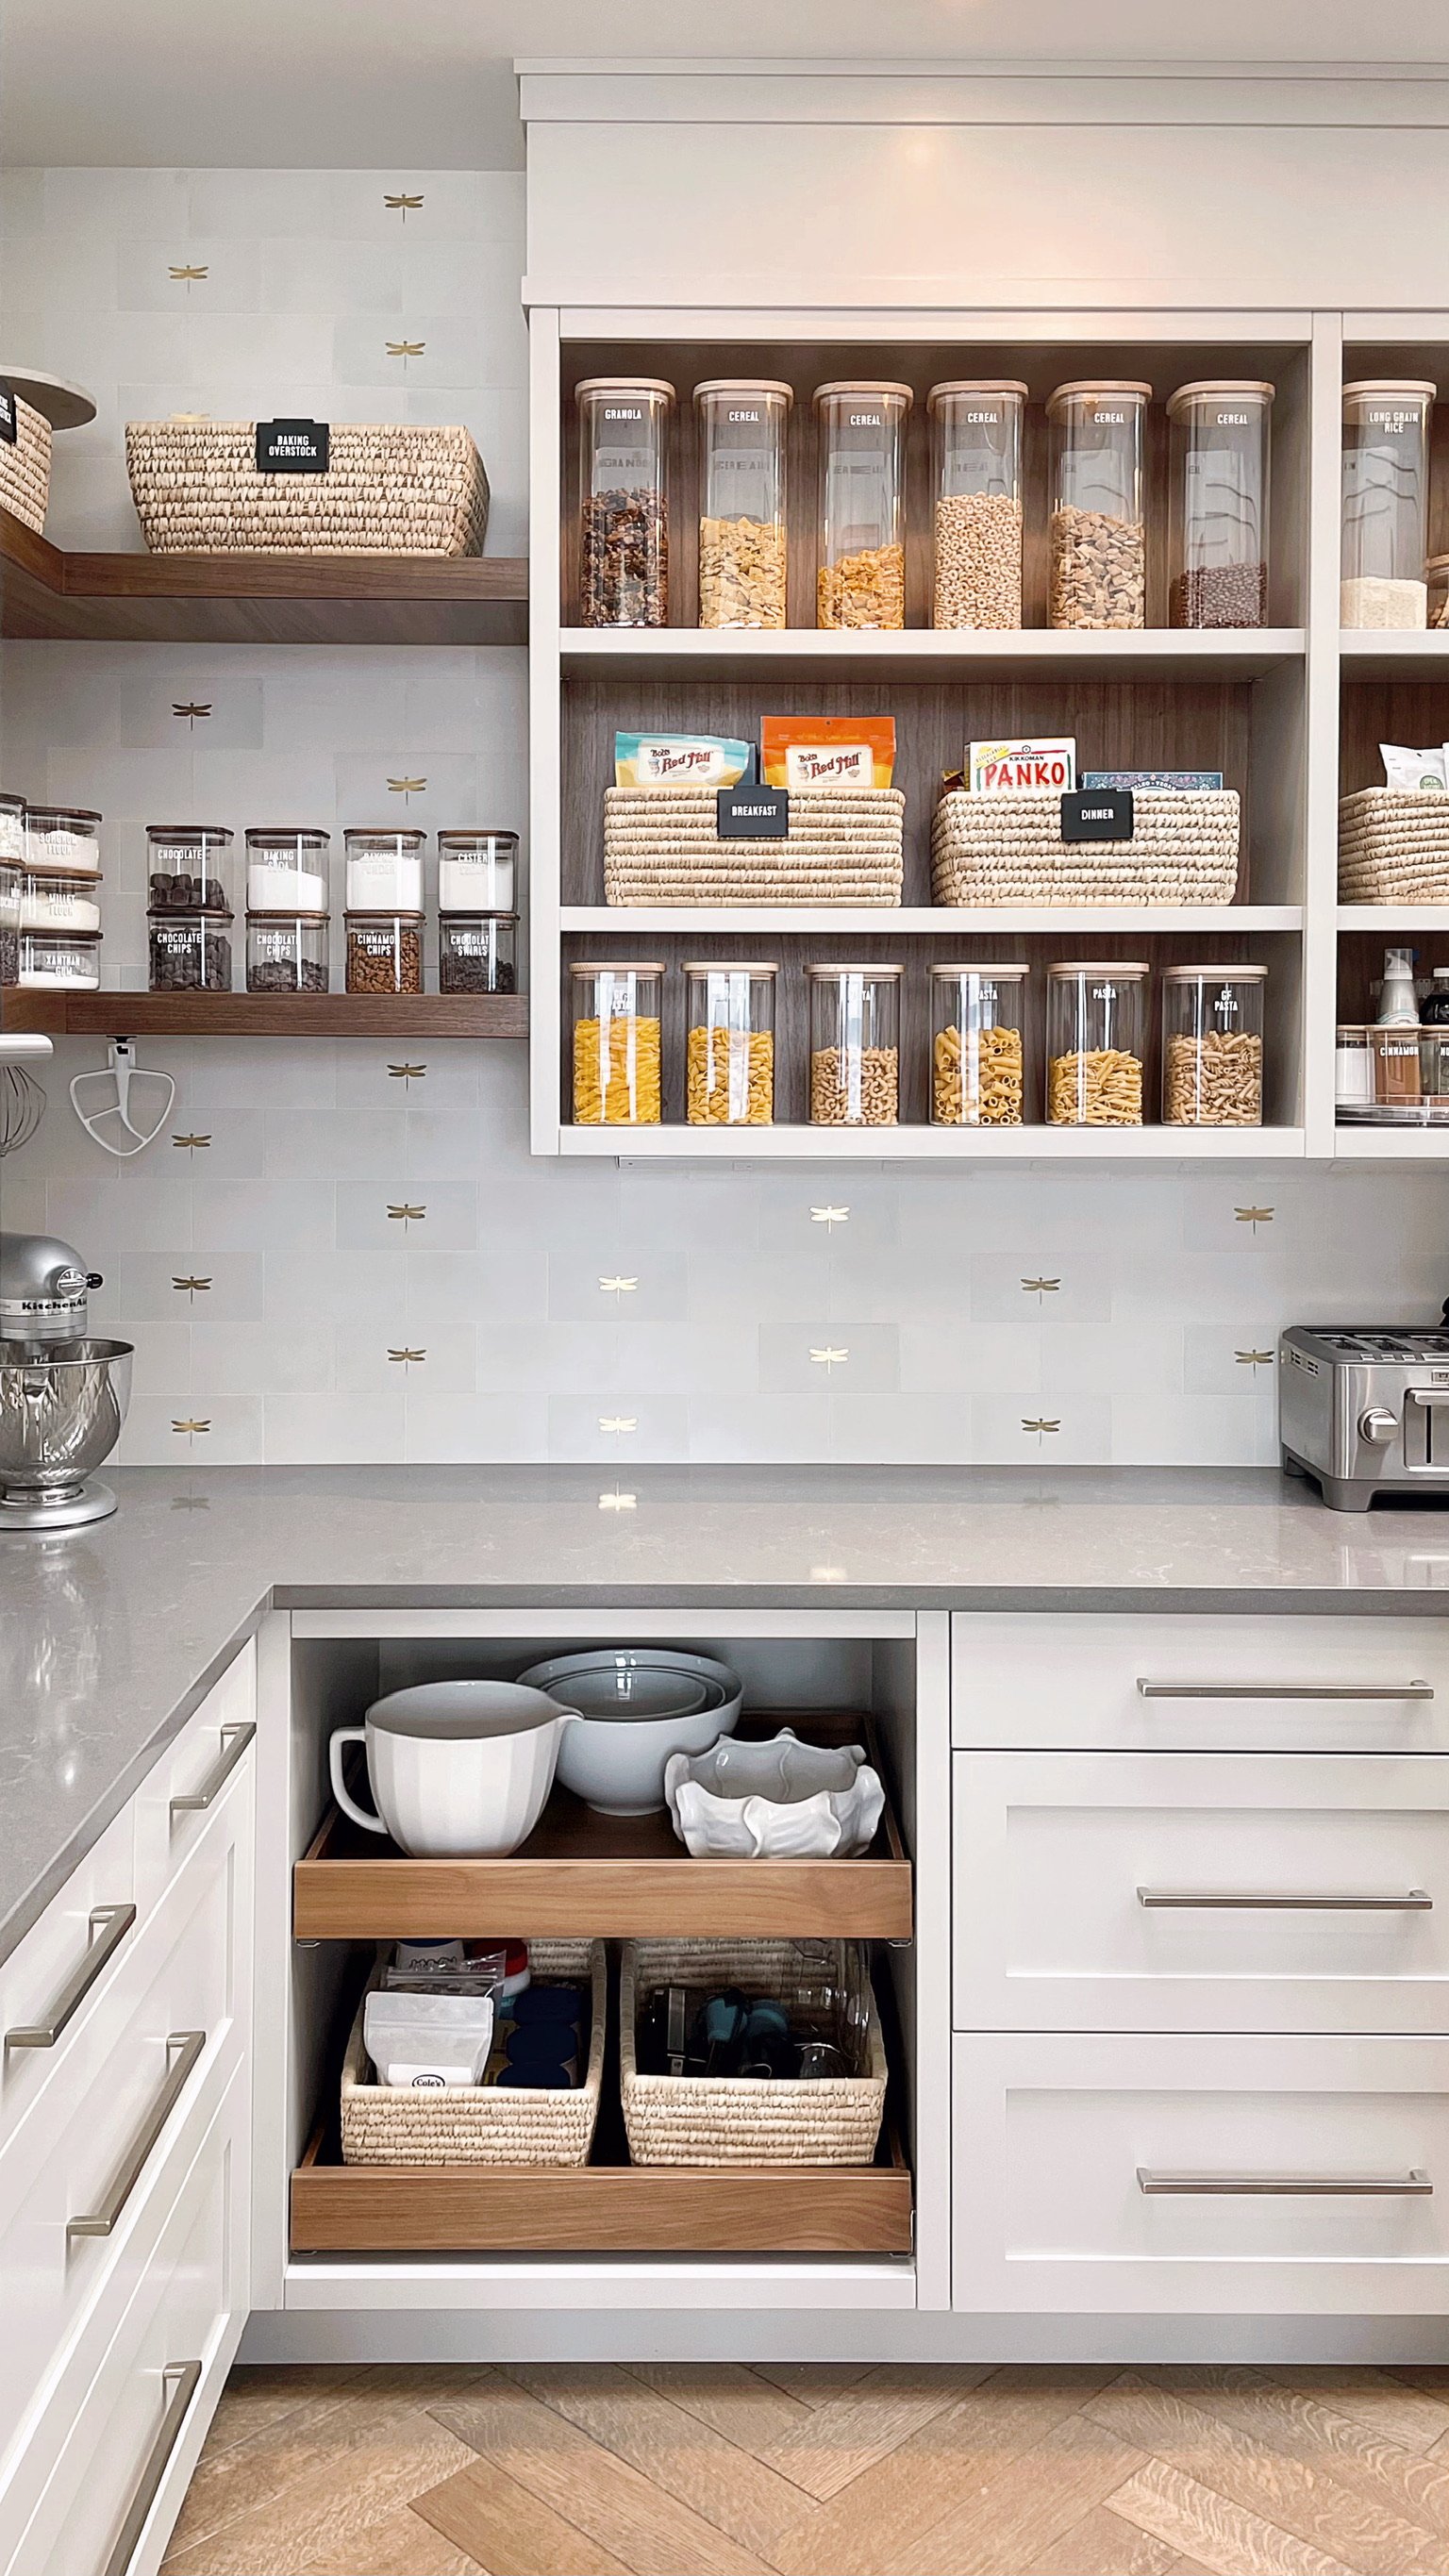 These Glass Storage Jars Will Give Your Pantry an Instant Facelift